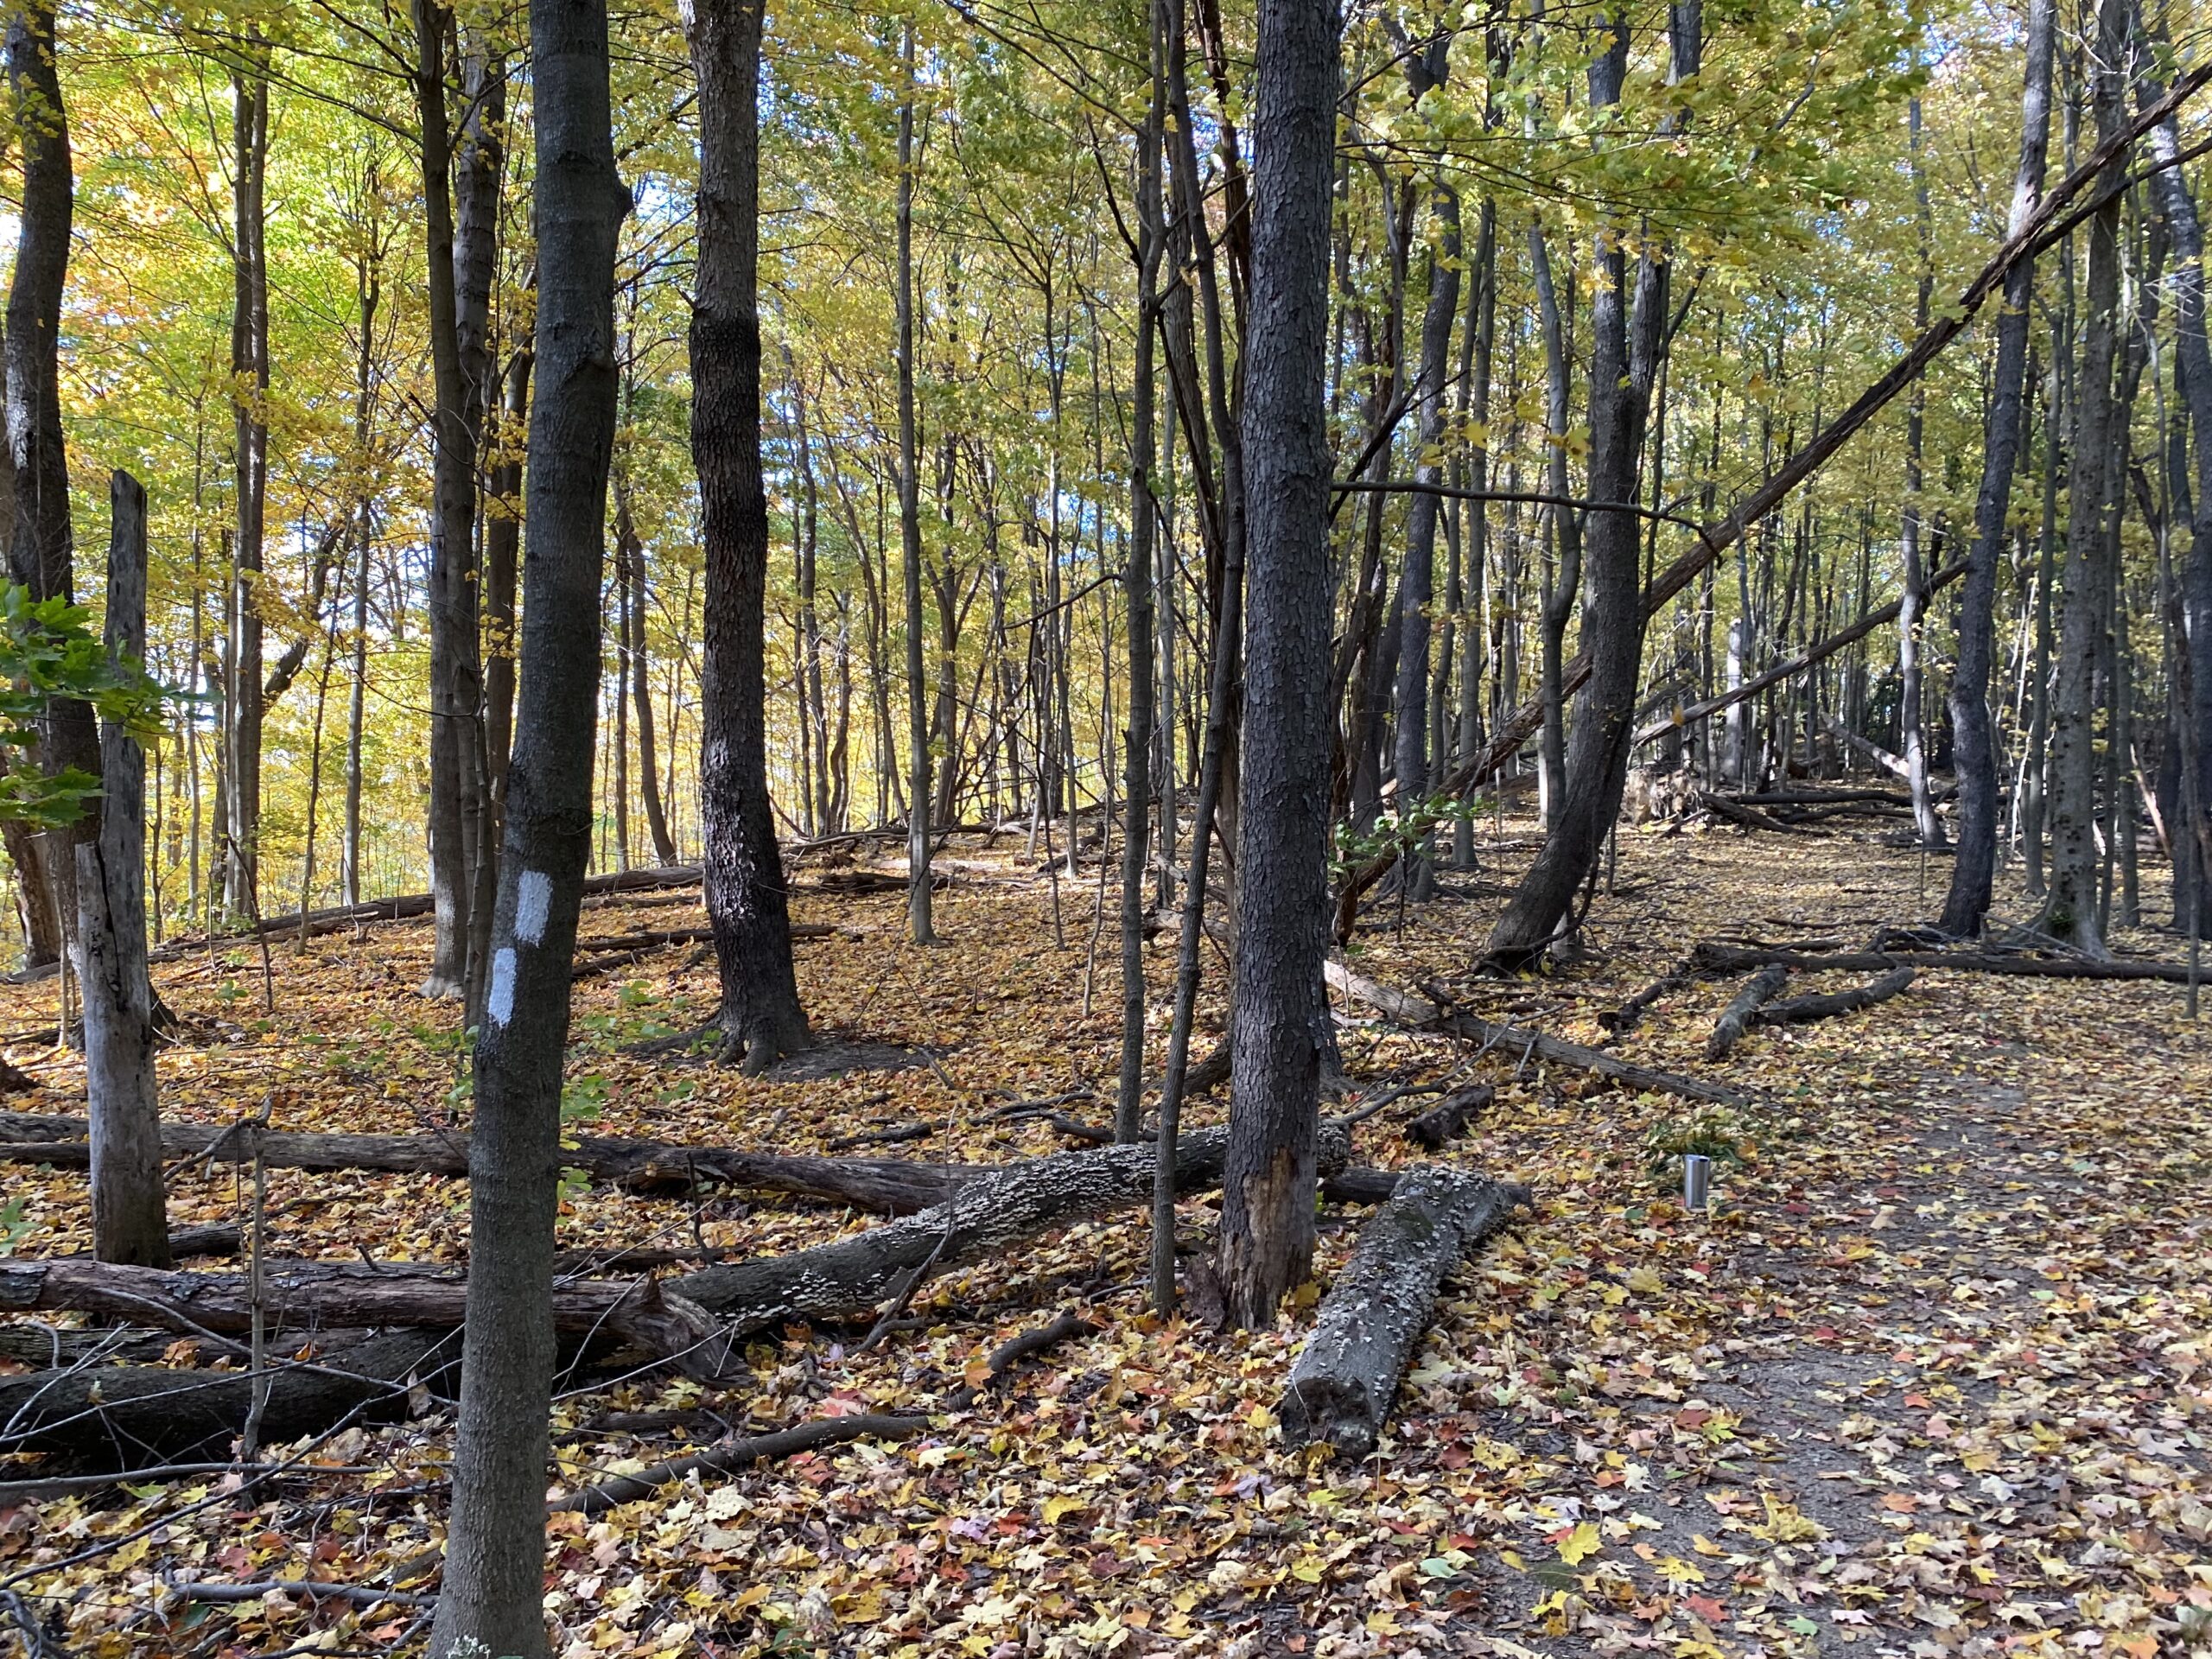 A dirt trail winds through a forest with trees beginning to turn yellow. Leaves of muted yellow and brown cover the trail and forest floor.